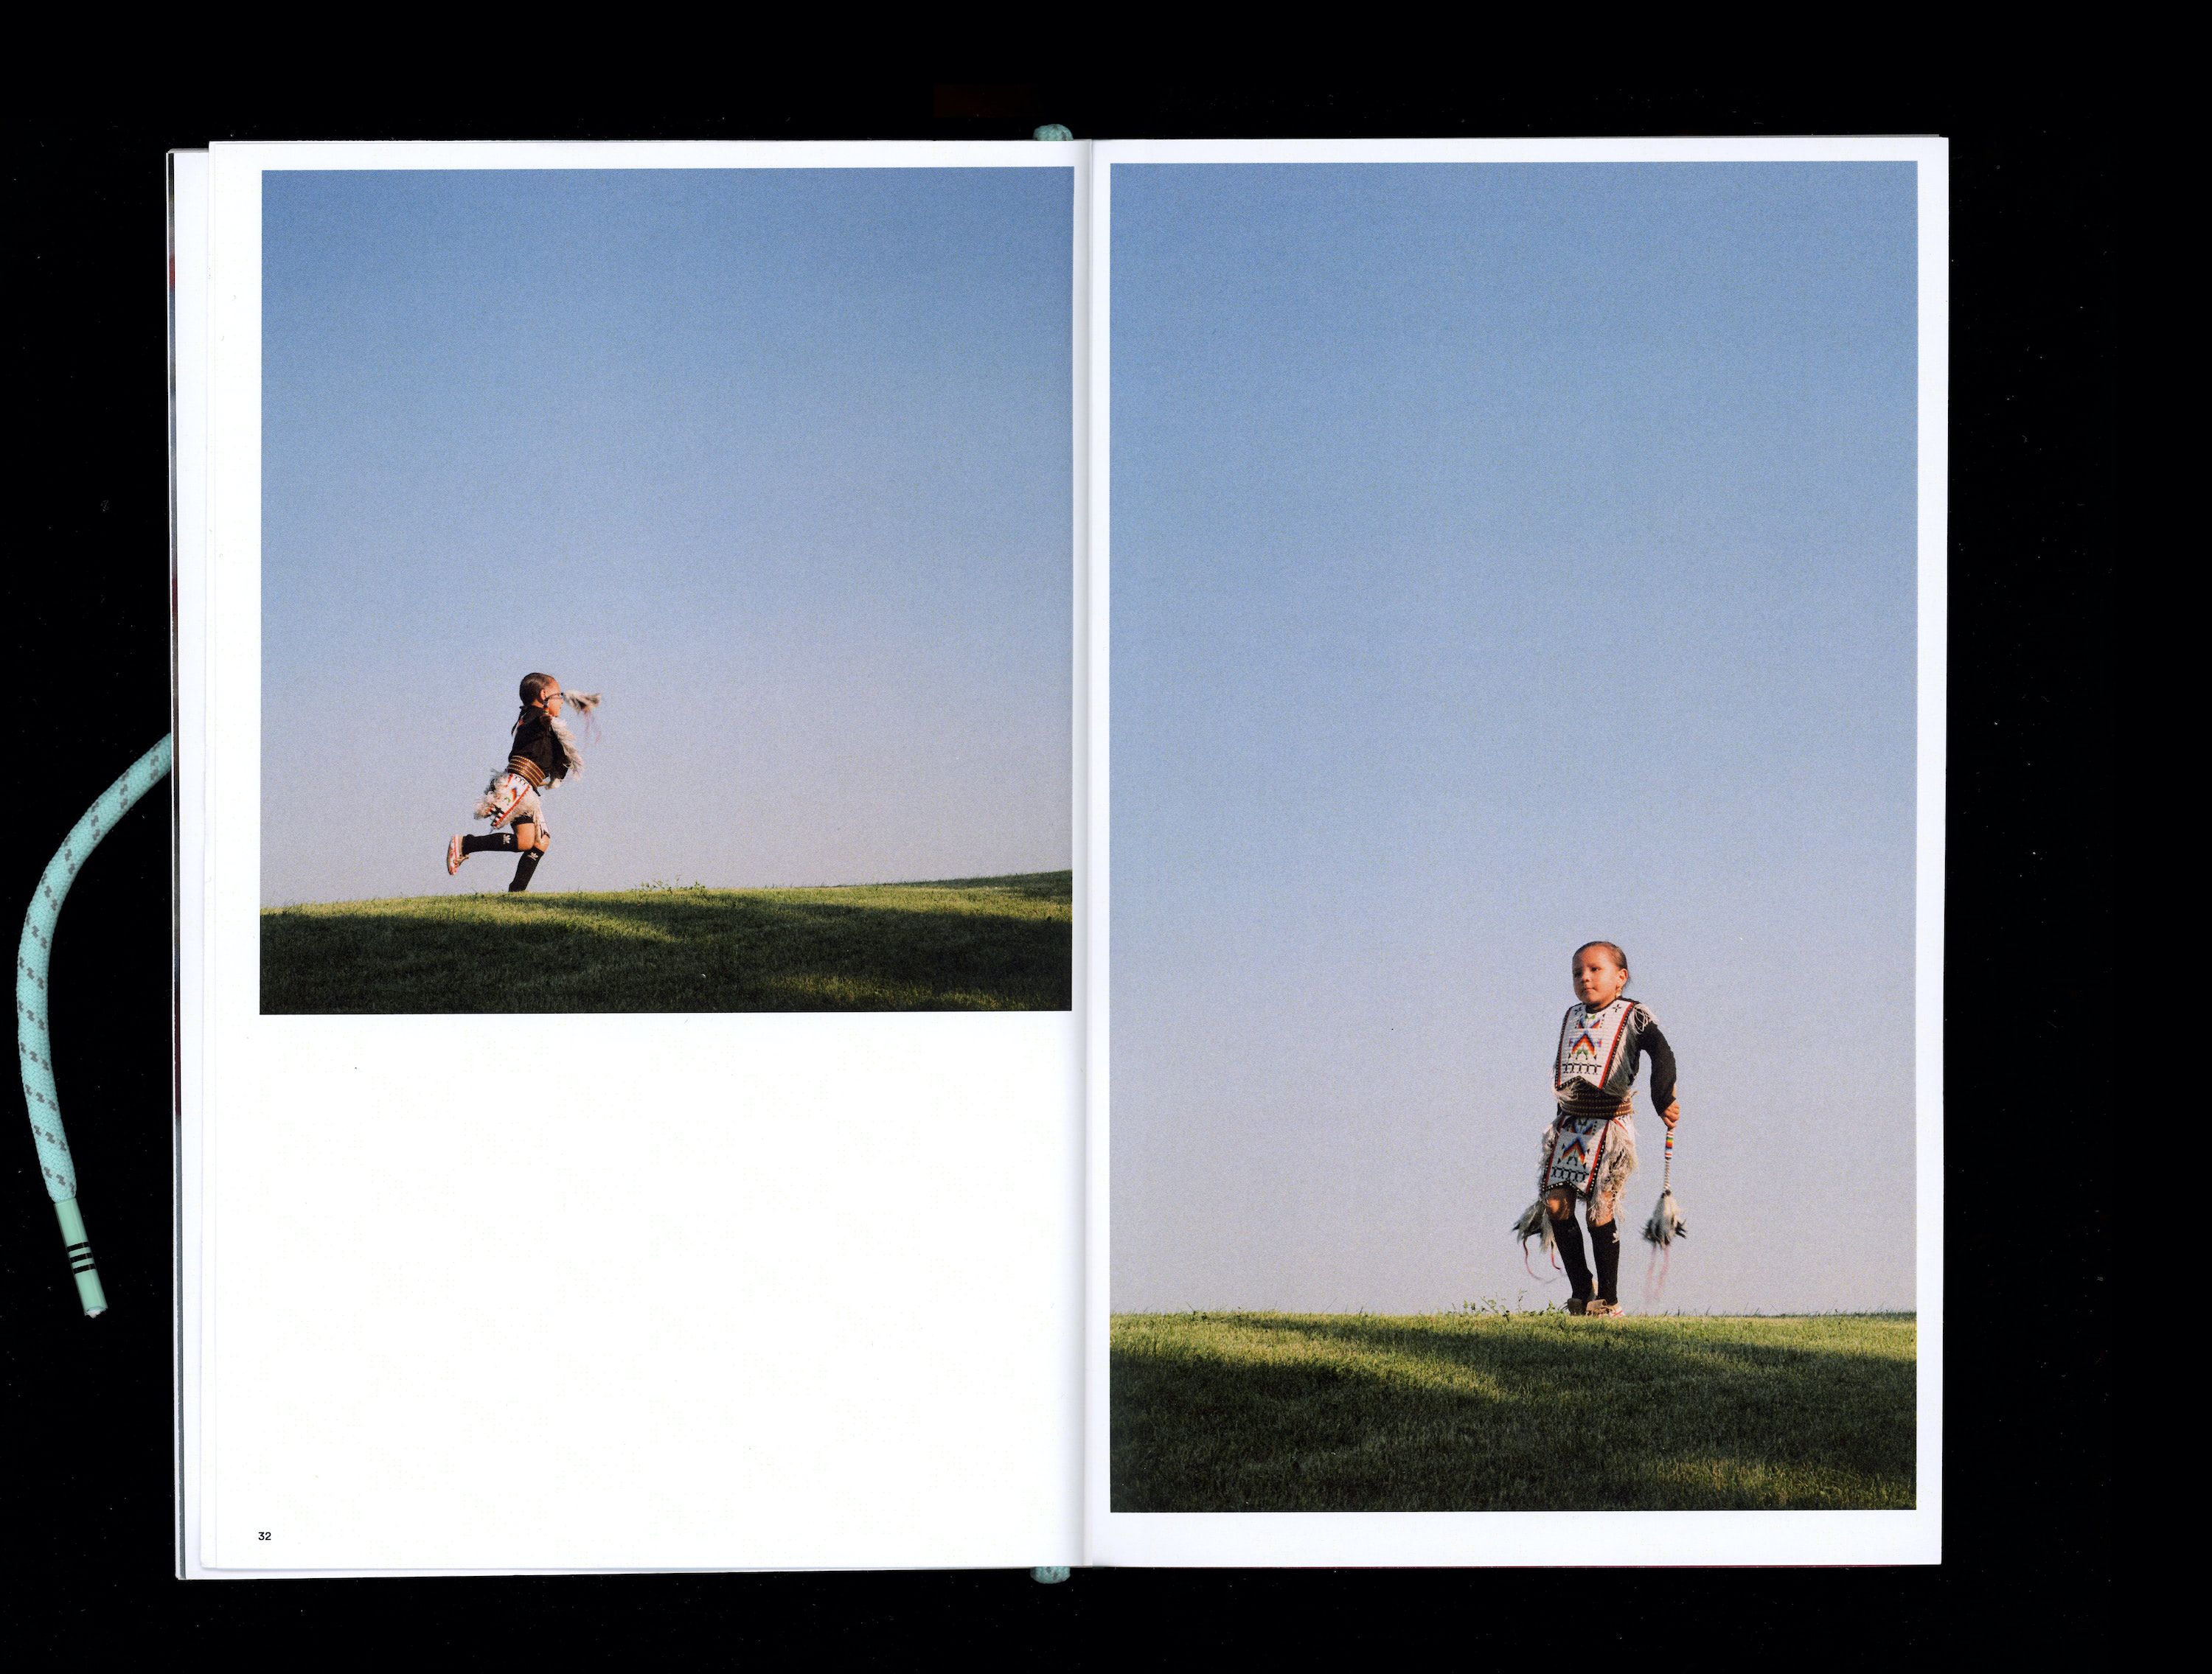 Photograph in book of Tokala Little Sky dancing on grass field with blue sky in the background